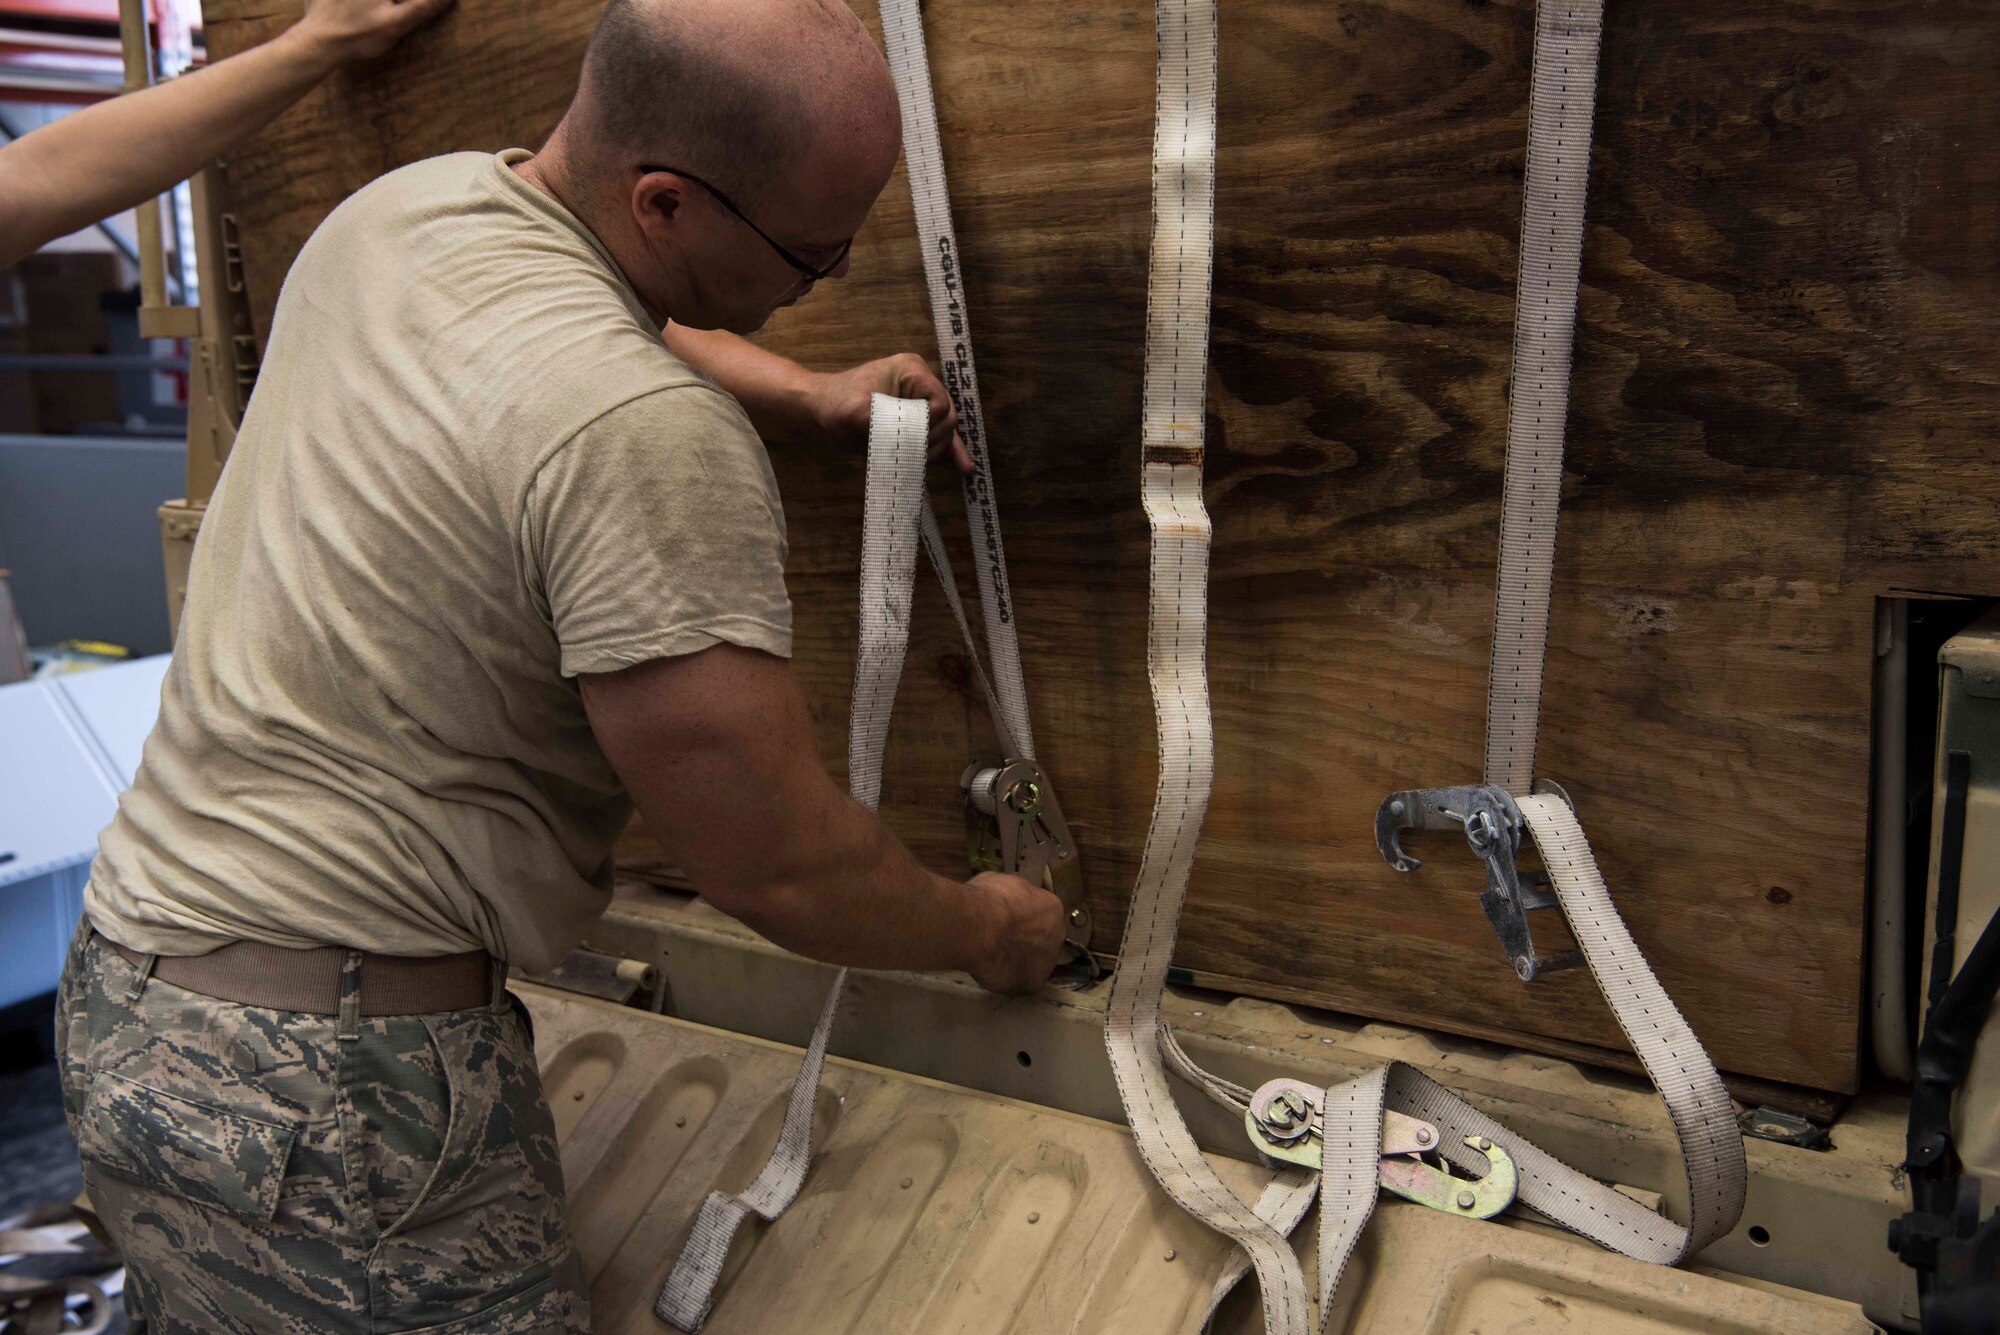 U.S. Air Force Master Sgt. Ursus Vargas, a 6th Medical Support Squadron medical material section chief, uses a ratchet strap to secure cargo at MacDill Air Force Base Fla., Sept. 4, 2019. Cargo included blankets, tents, power generators and assorted health devices. (U.S. Air Force Photo by Senior Airman Frank Rohrig)